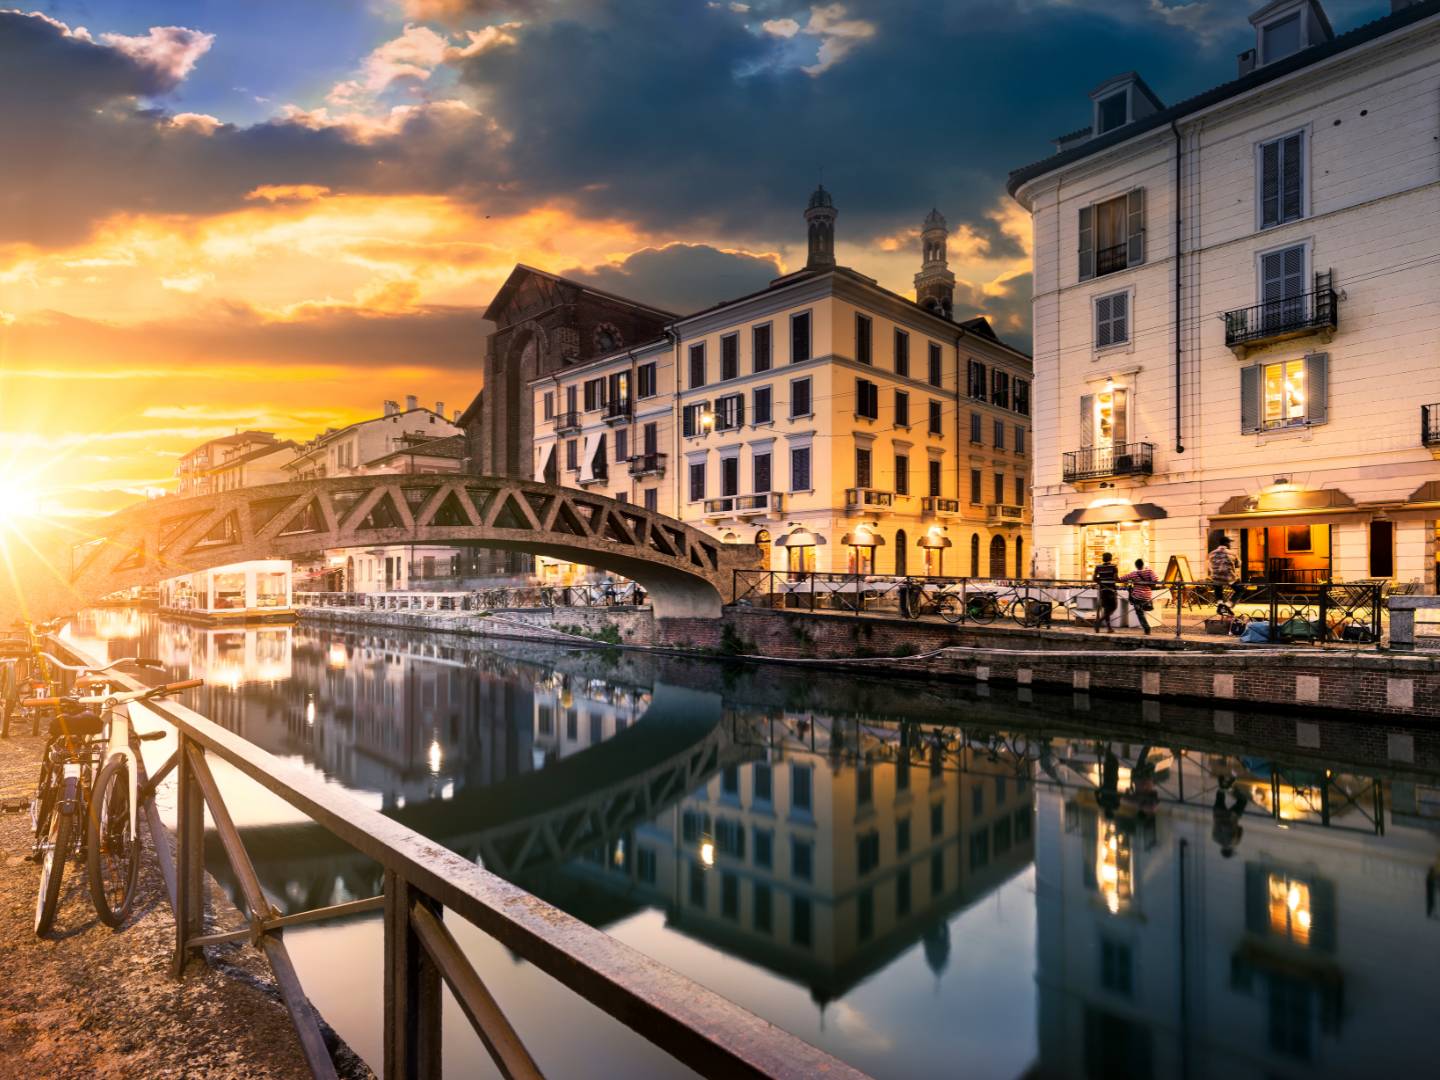 An image showing Navigli area in Milan before the sunset